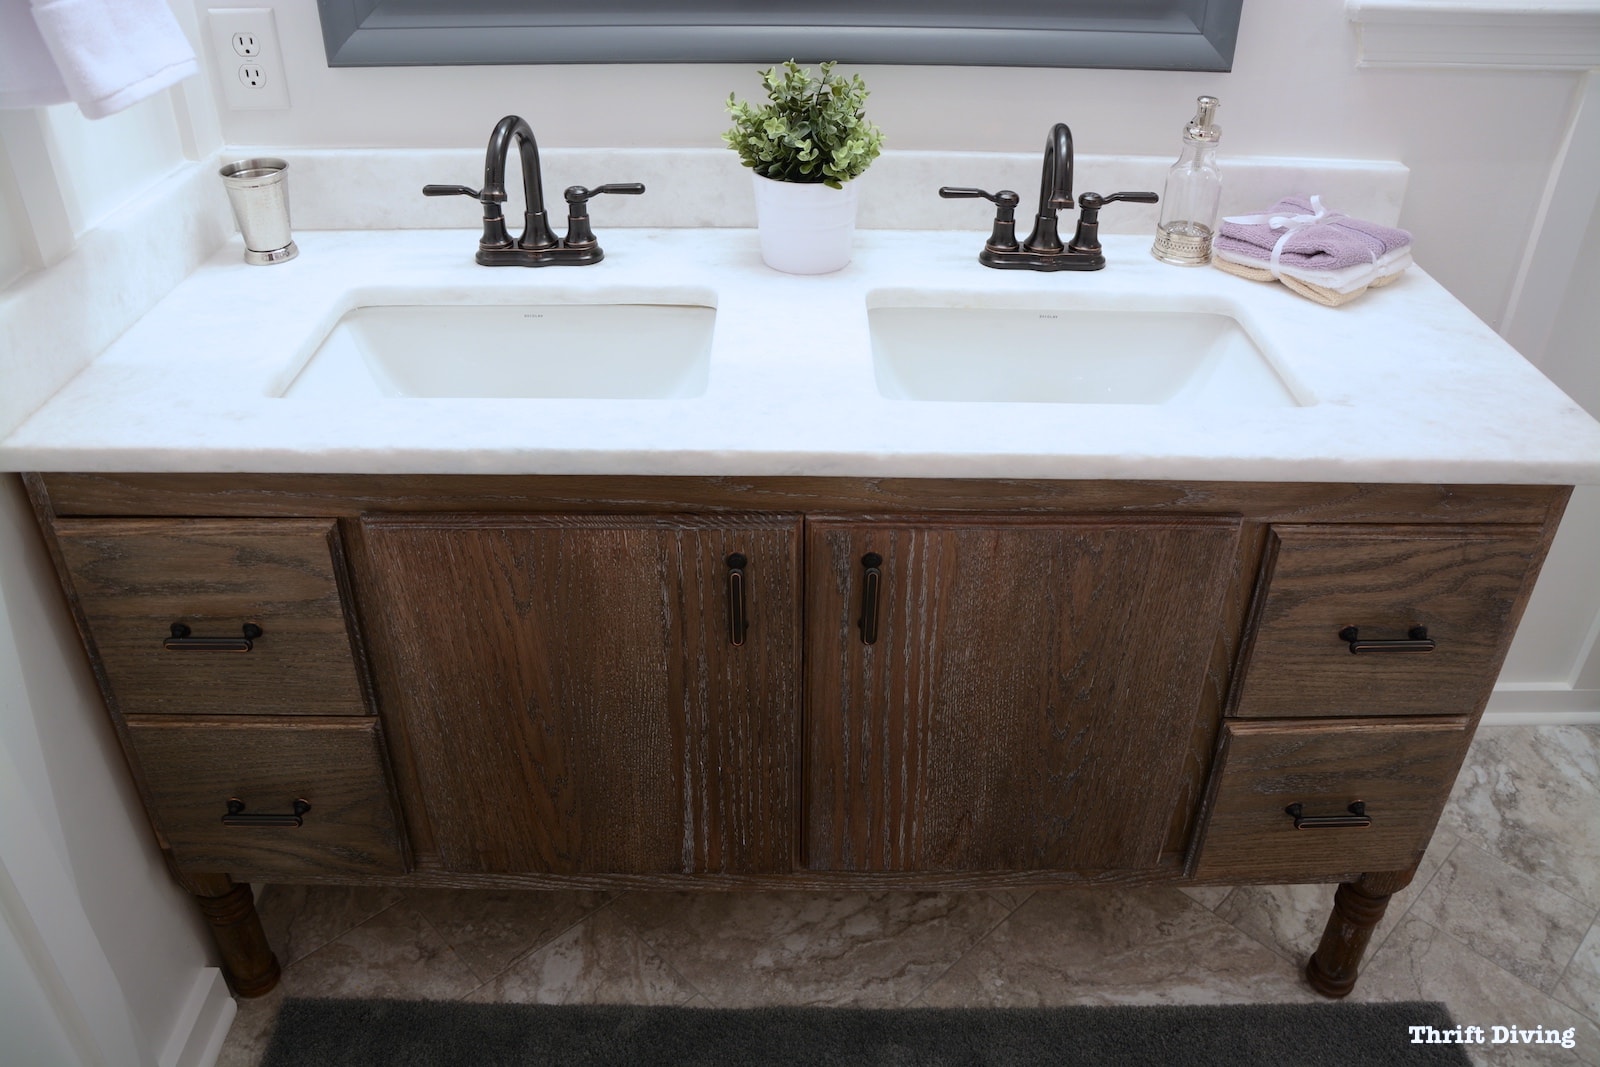 BEFORE & AFTER: How to Build a DIY Bathroom Vanity From Scratch